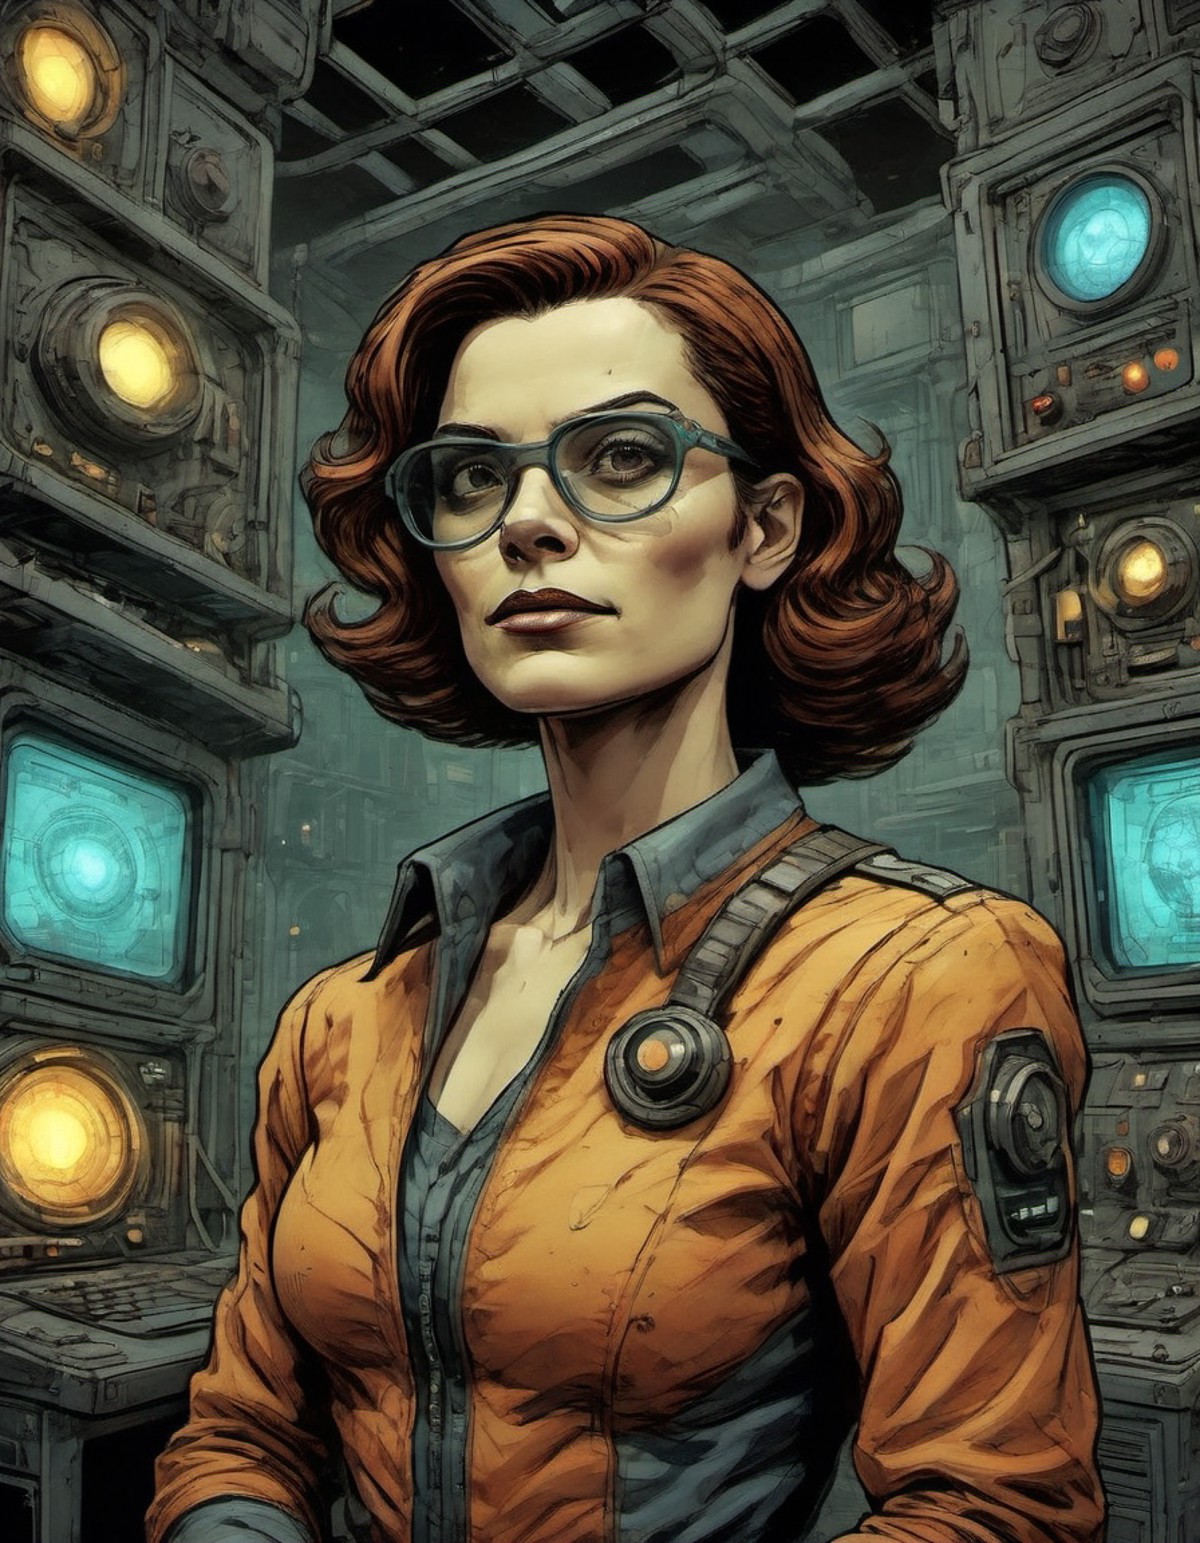 comic book gritty colorized tintype portrait of a sci-fi hero named Commander Bria Ursan in an underground bunker glowing ...